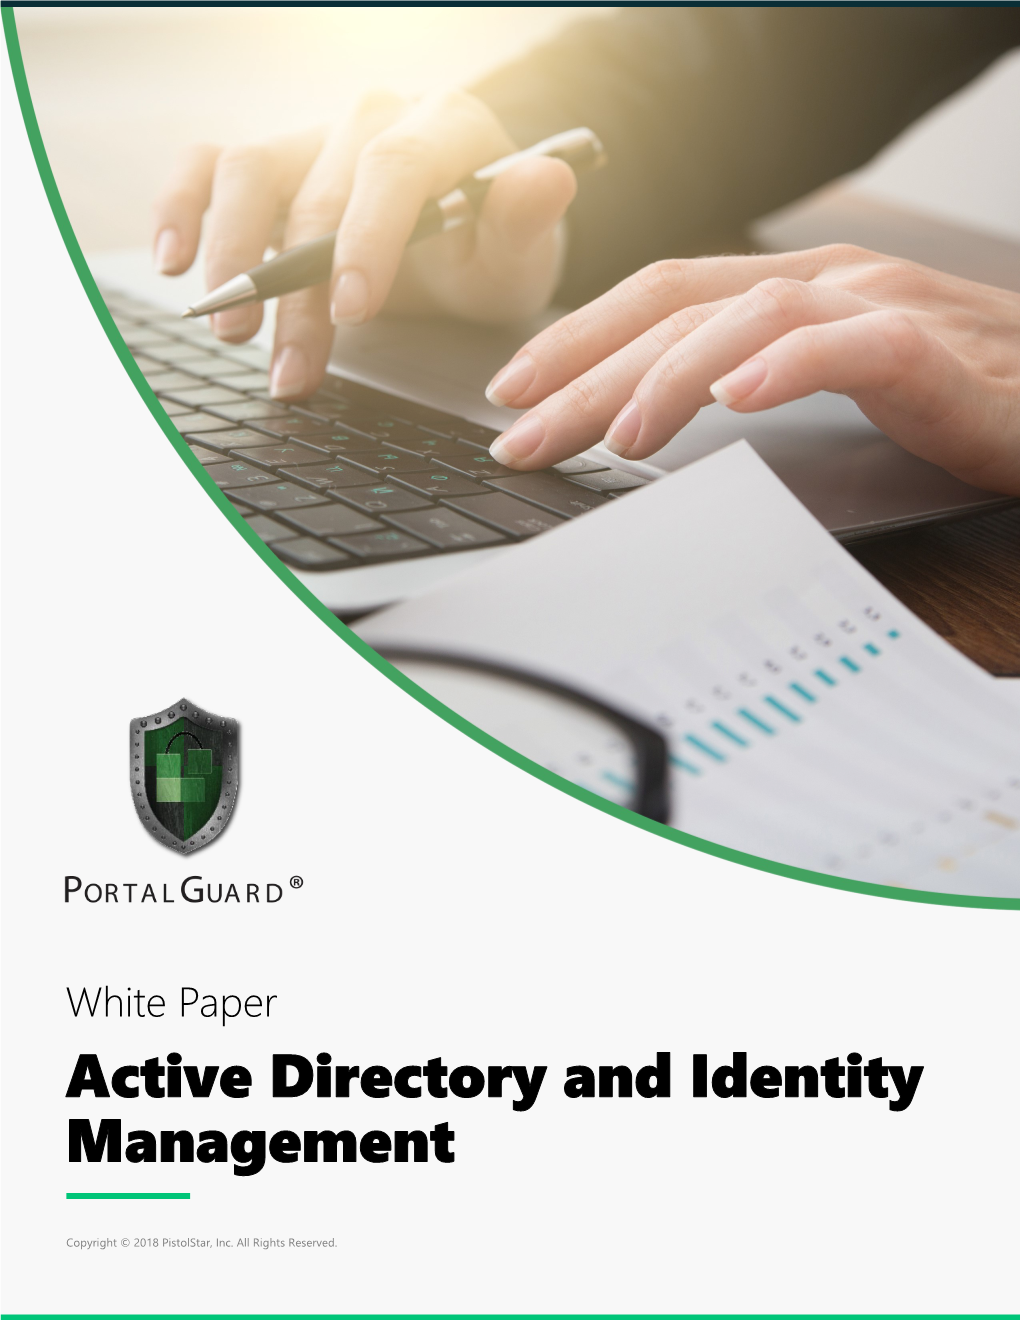 Active Directory and Identity Management